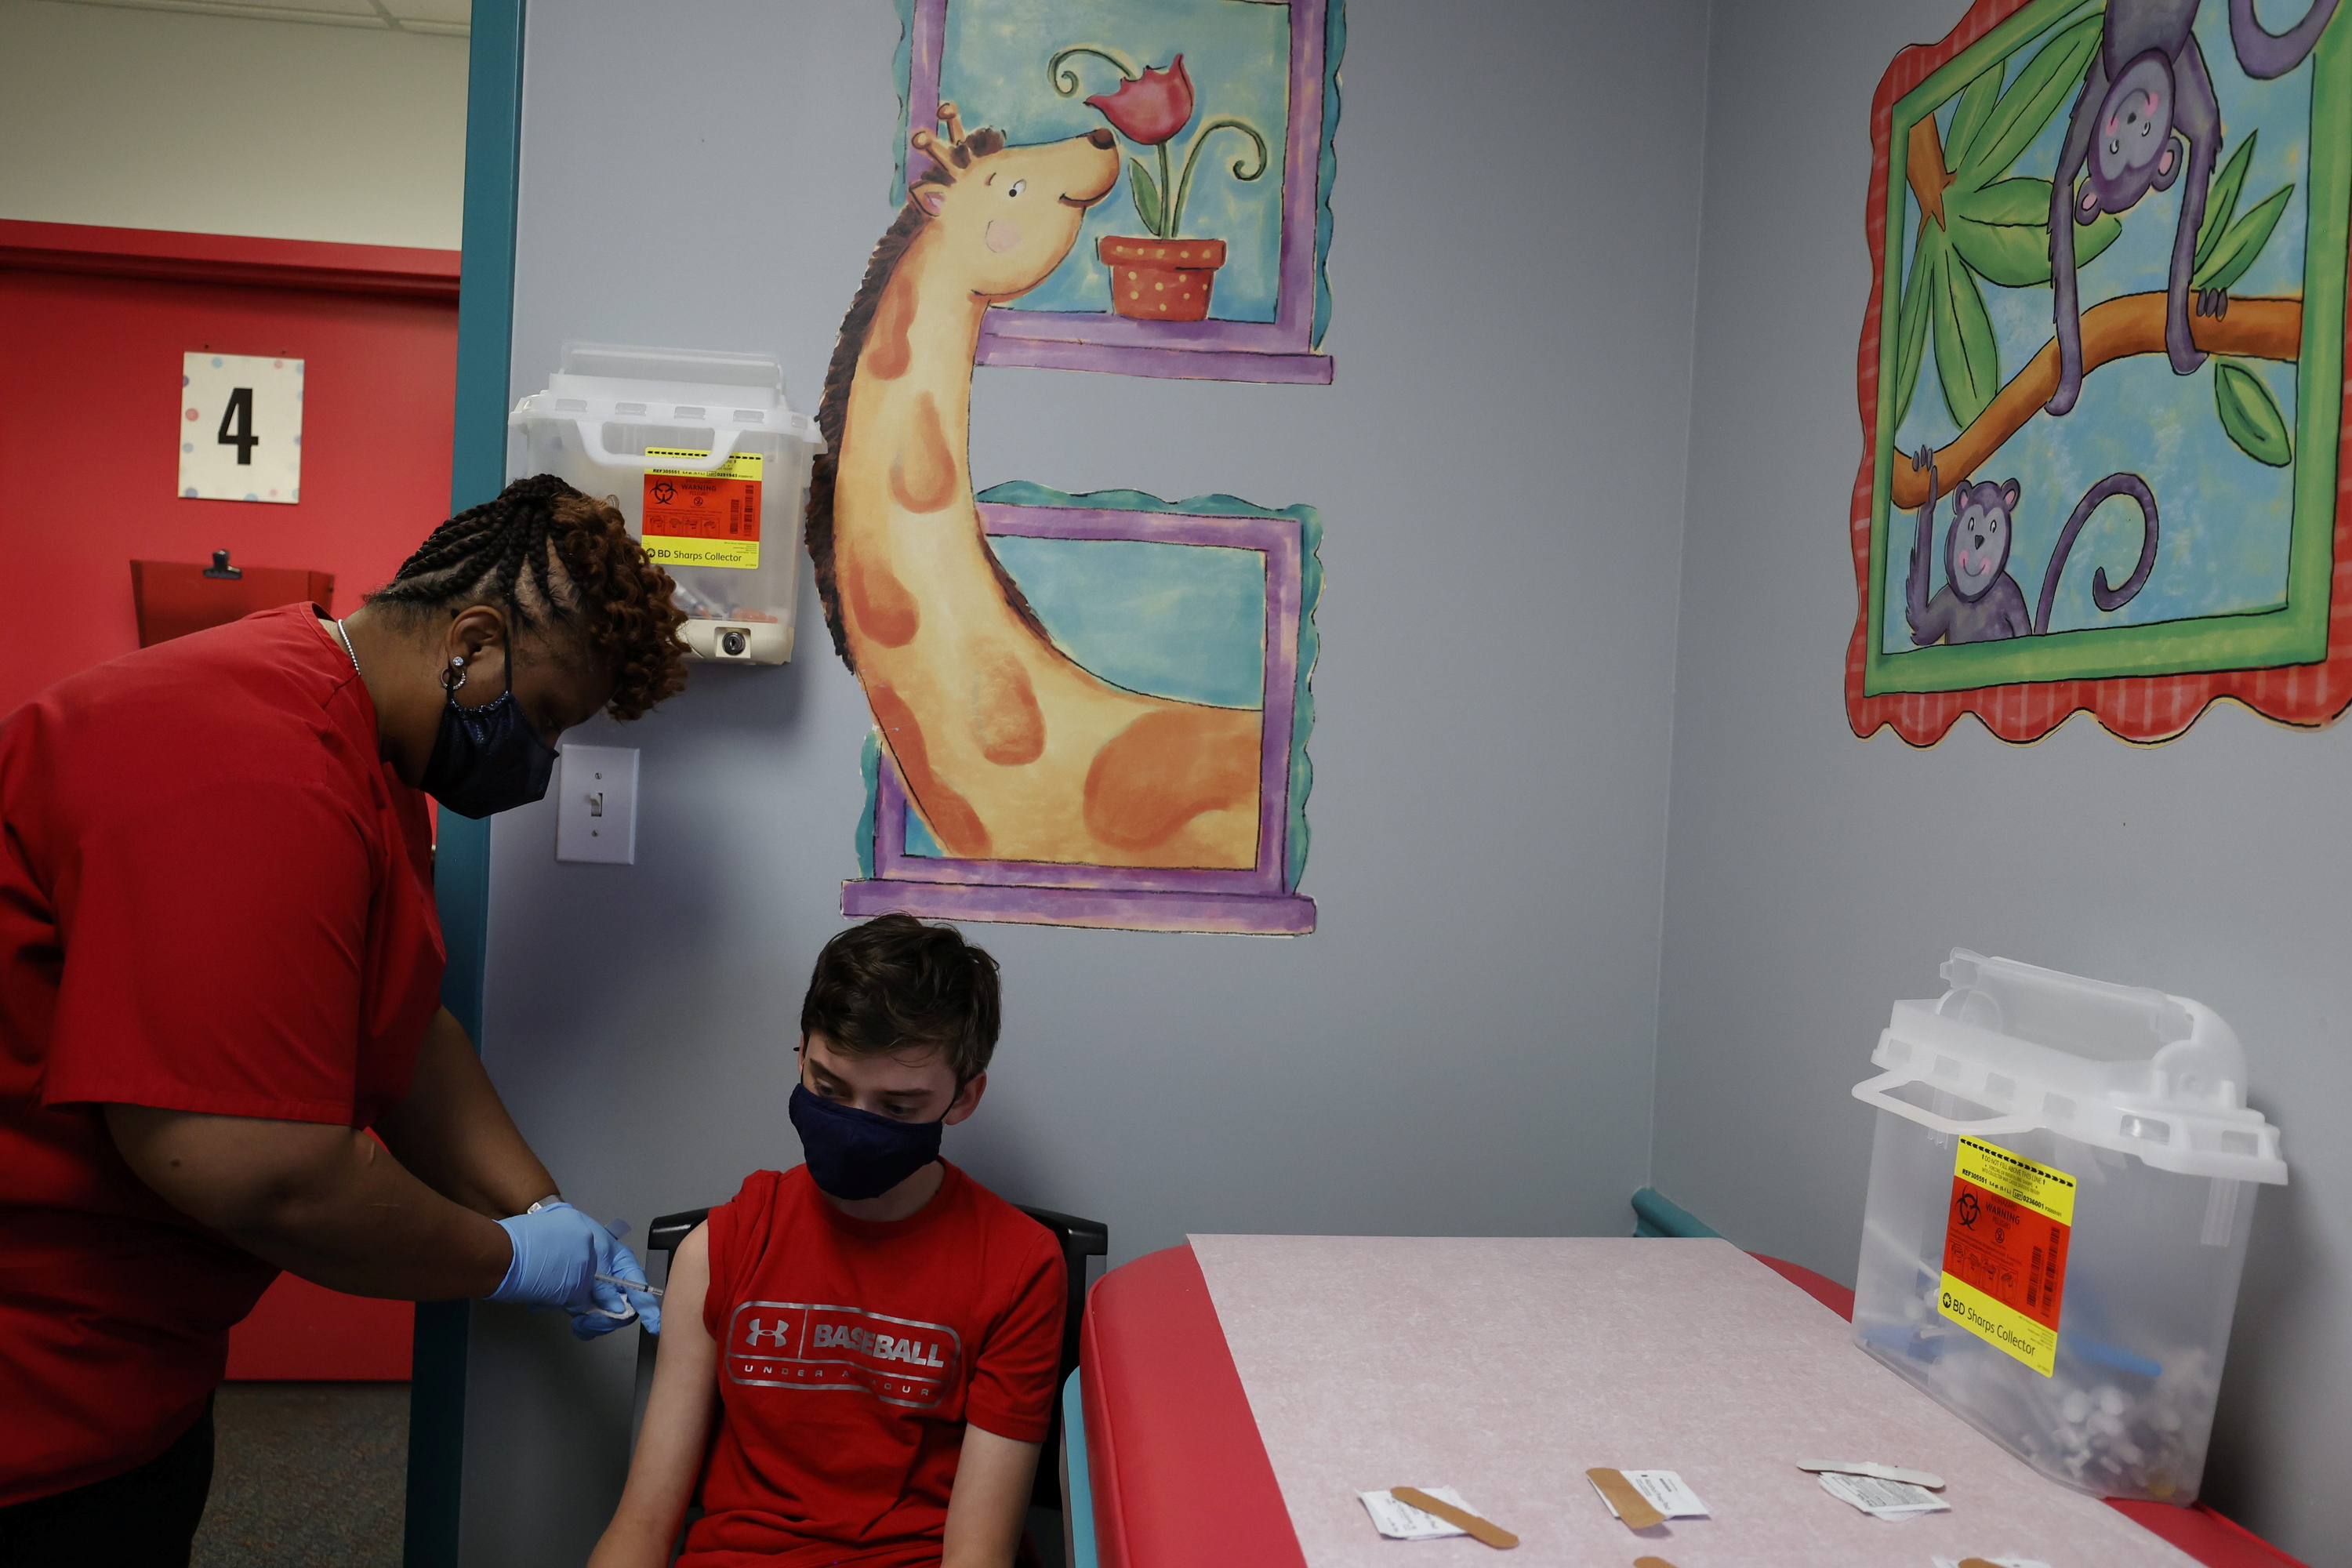 Aidan Mohl, 13, is inoculated with Pfizer's vaccine against coronavirus disease (COVID-19) by Registered Medical Assistant Melissa Dalton, after Georgia authorized the vaccine for ages over 12 years, at Dekalb Pediatric Center in Decatur